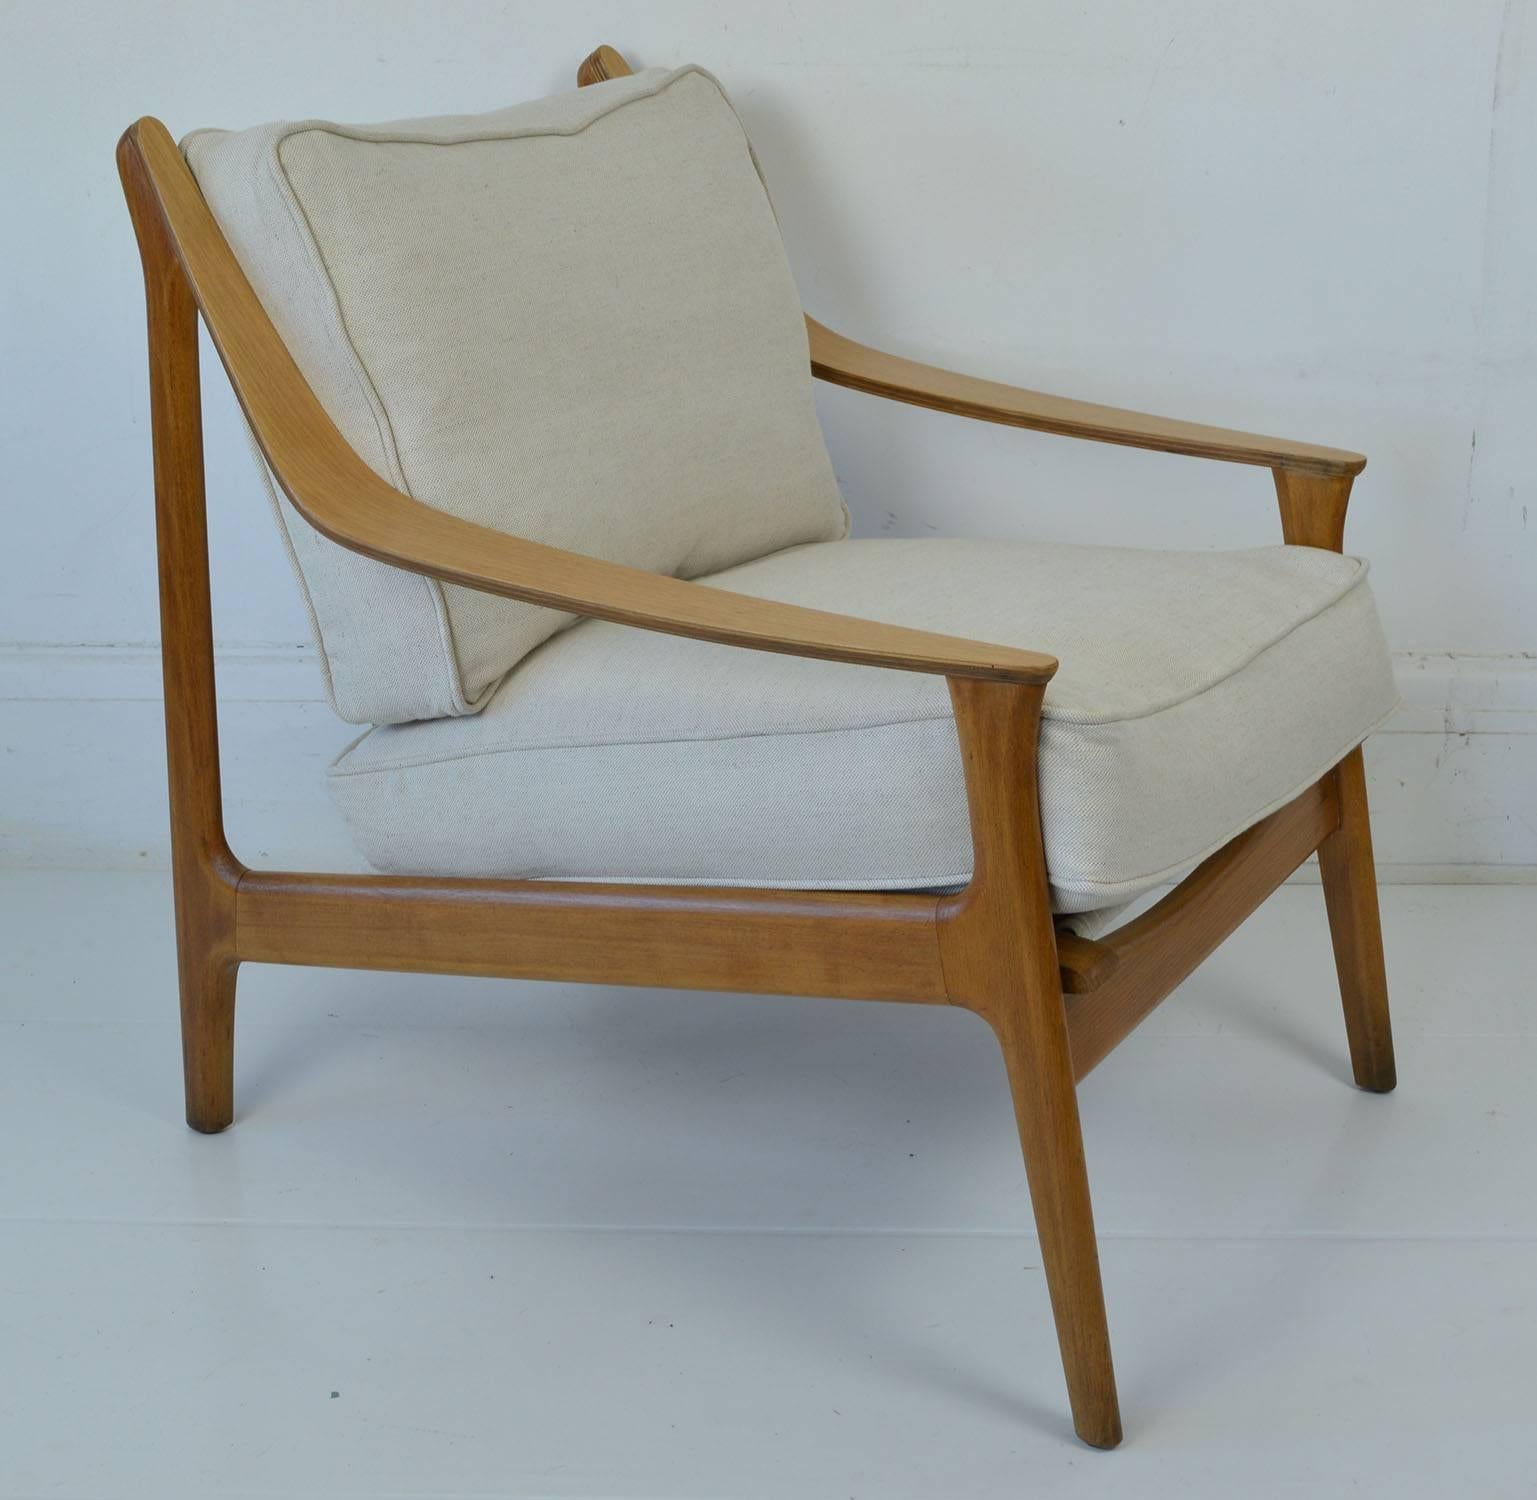 Very stylish chair in Scandinavian style.

The chair is fully marked up to show it was made by the Golden Key Furniture Company, London. 

Probably designed by David Kossoff who worked for the company.

The cushions are not original. They have been